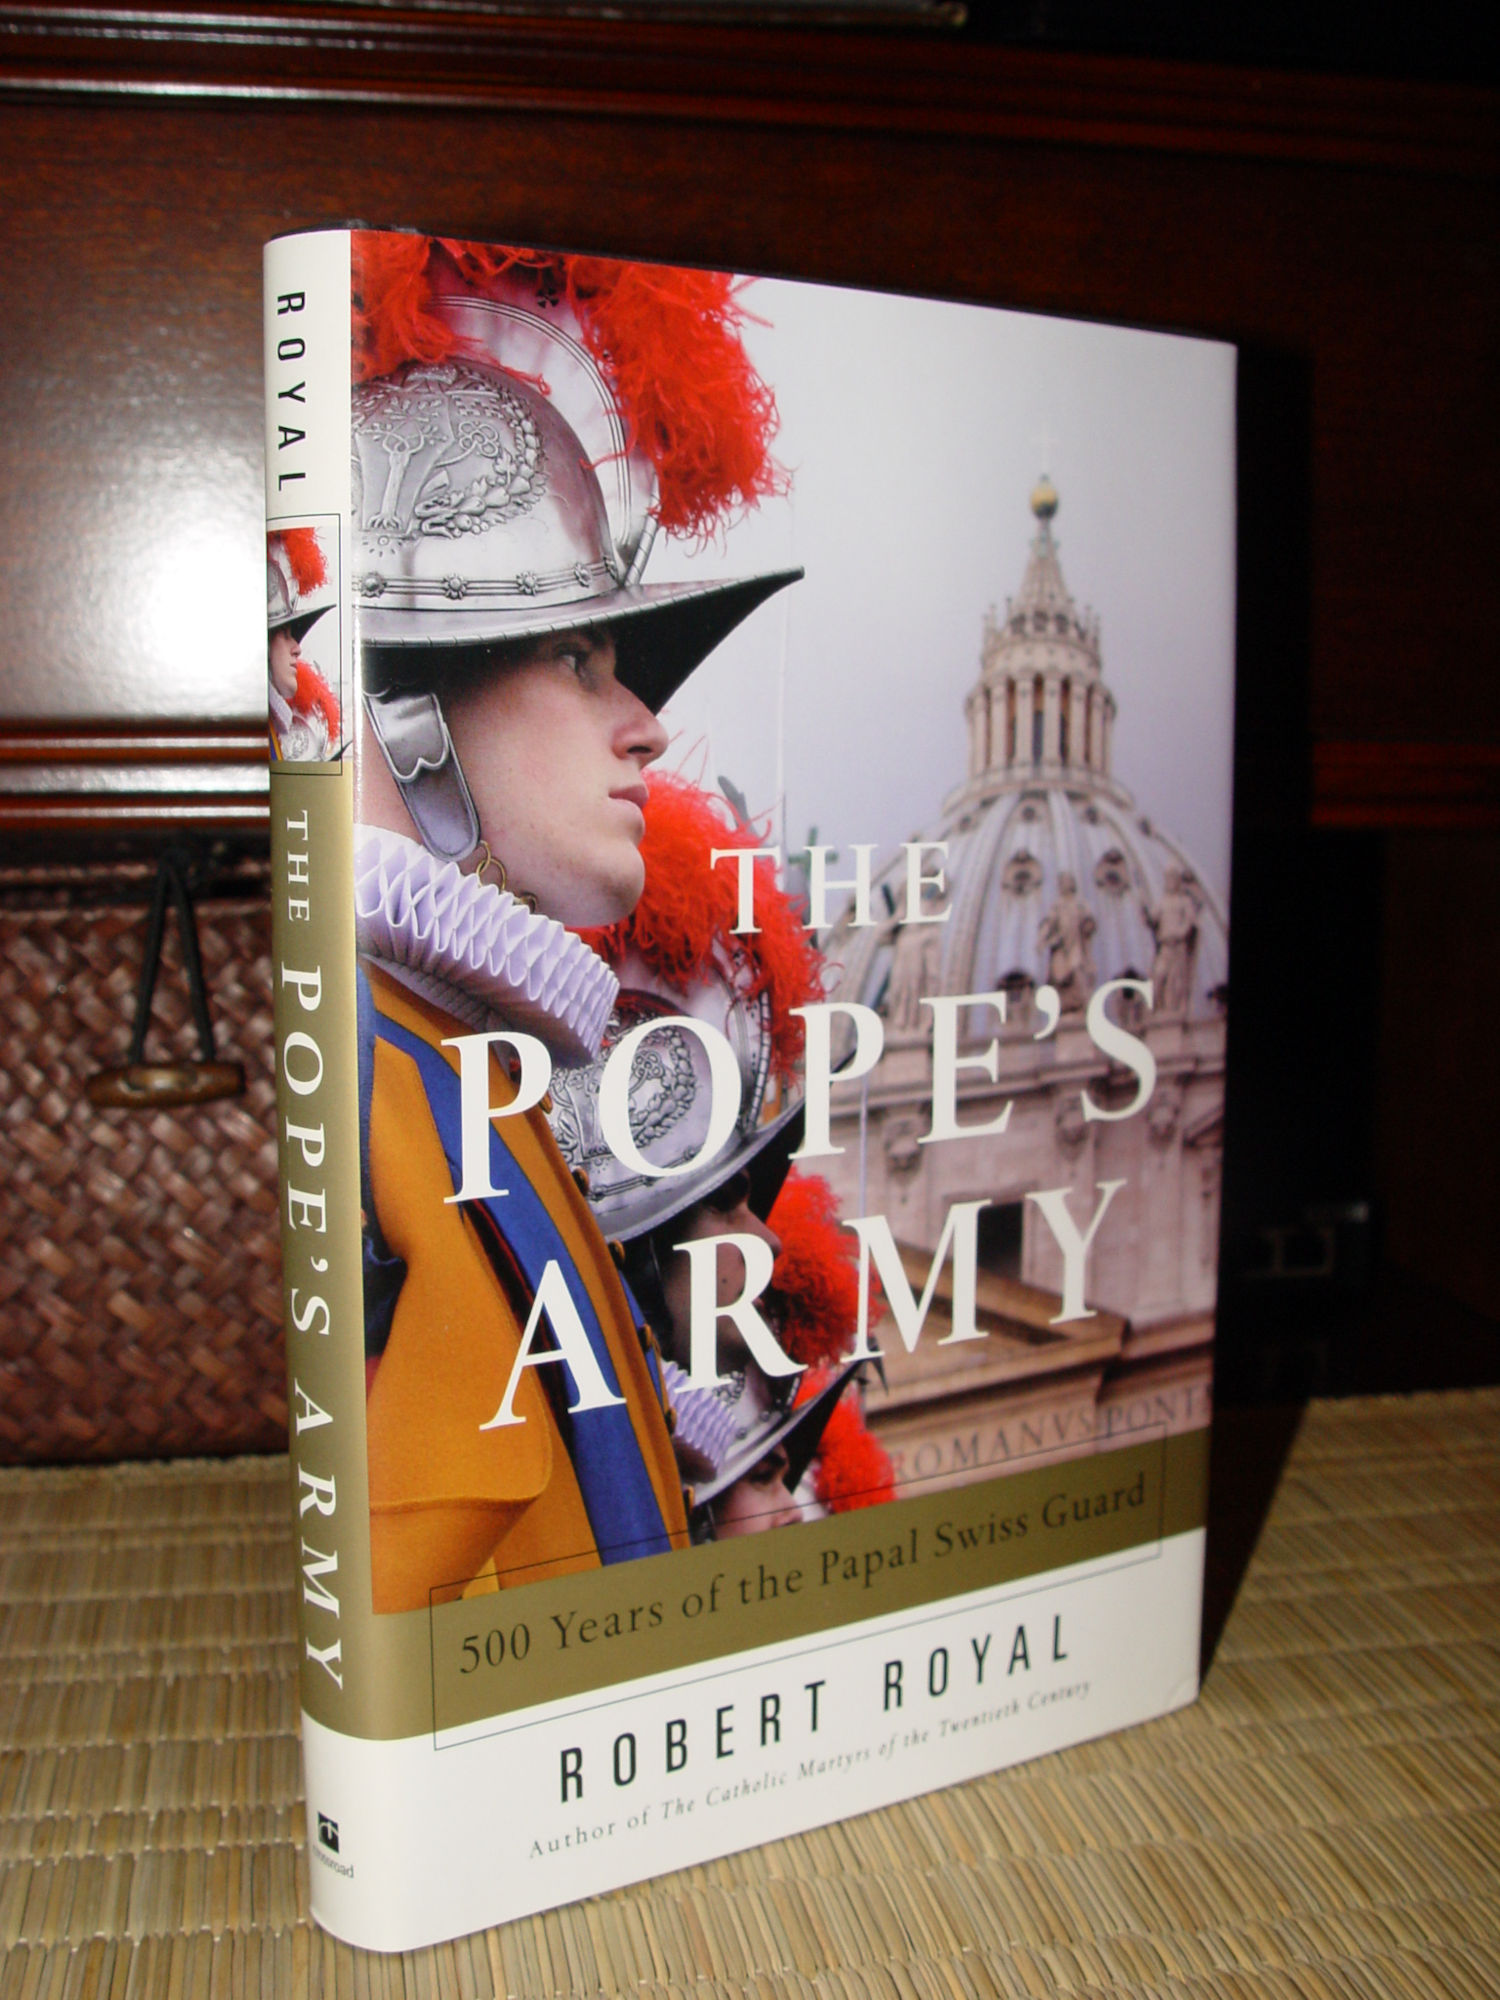 The Pope's Army: 500 Years of the Papal
                          Swiss Guard by R. Royal 2006